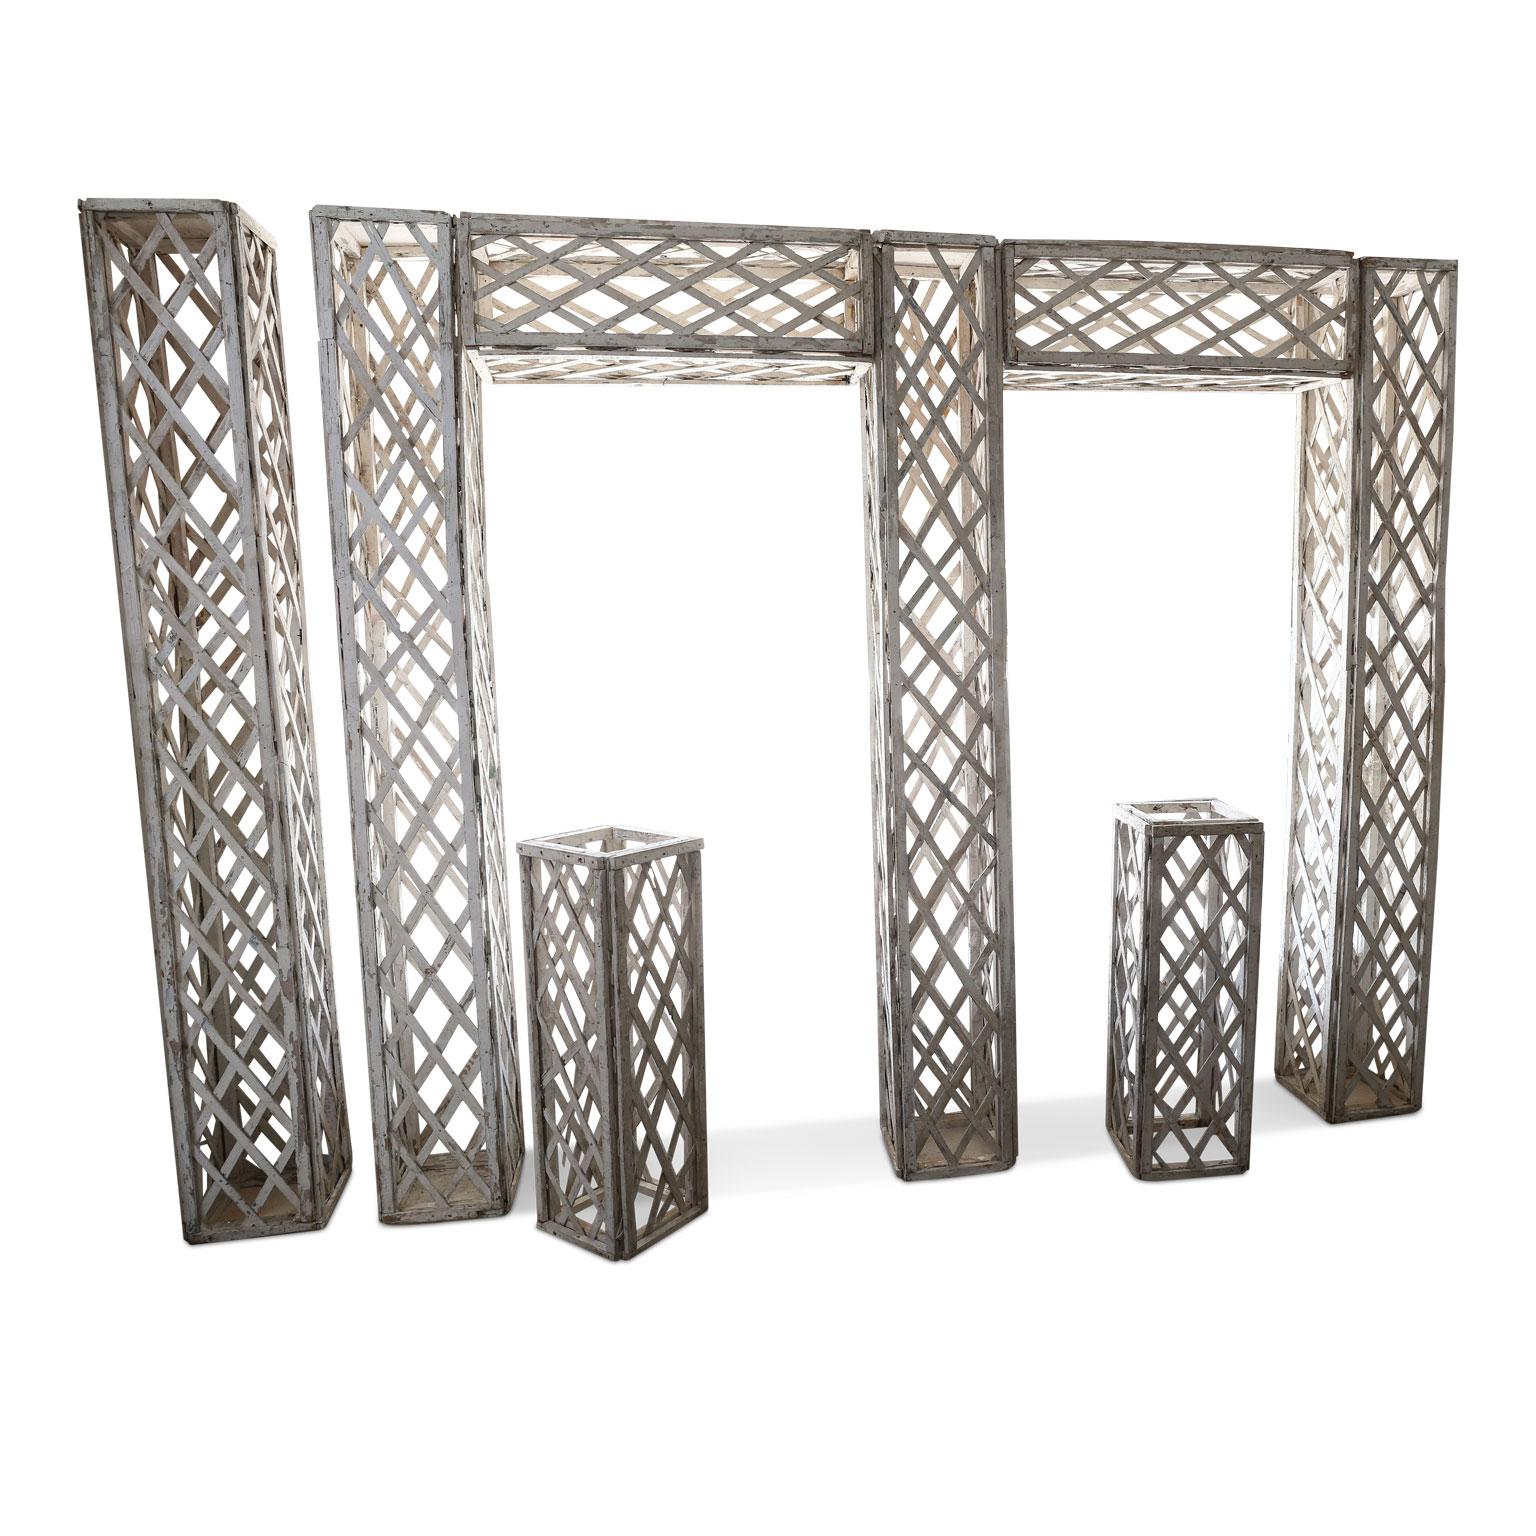 Vintage French White Painted Trellis For Sale 11